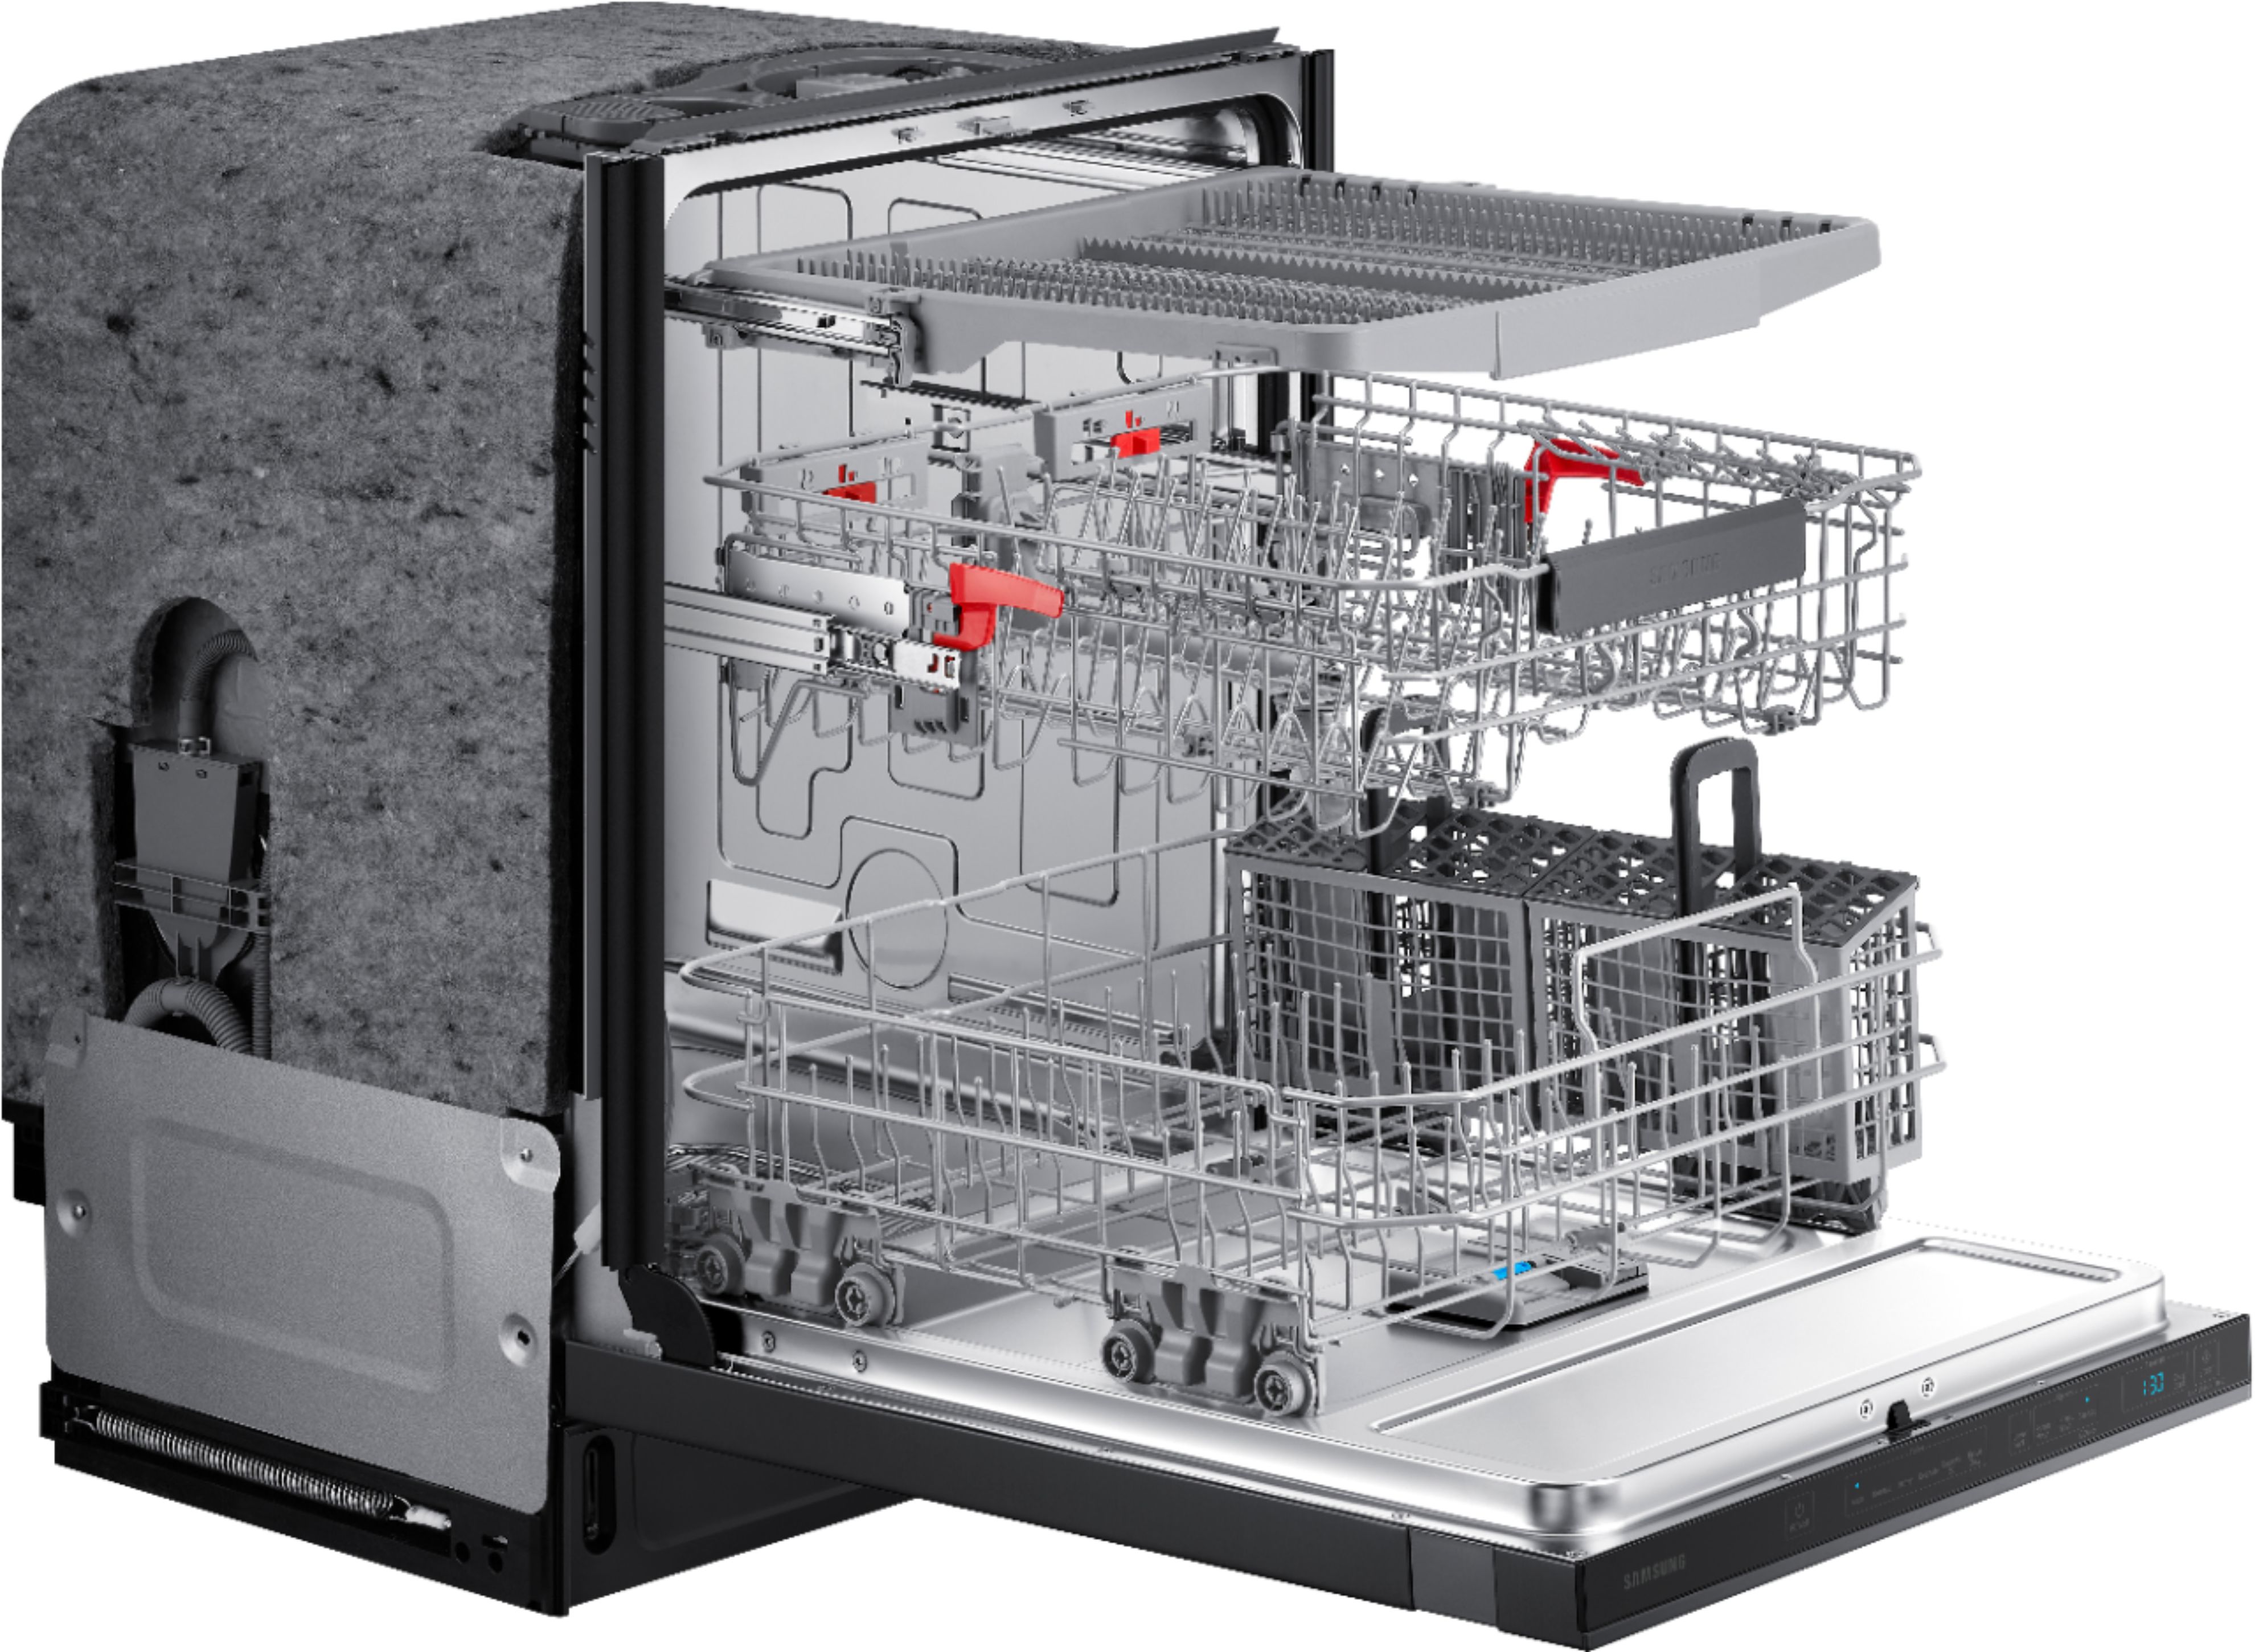 Samsung StormWash 24 Top Control Built-In Dishwasher with AutoRelease Dry,  3rd Rack, 42 dBA Black Stainless Steel DW80R7060UG - Best Buy